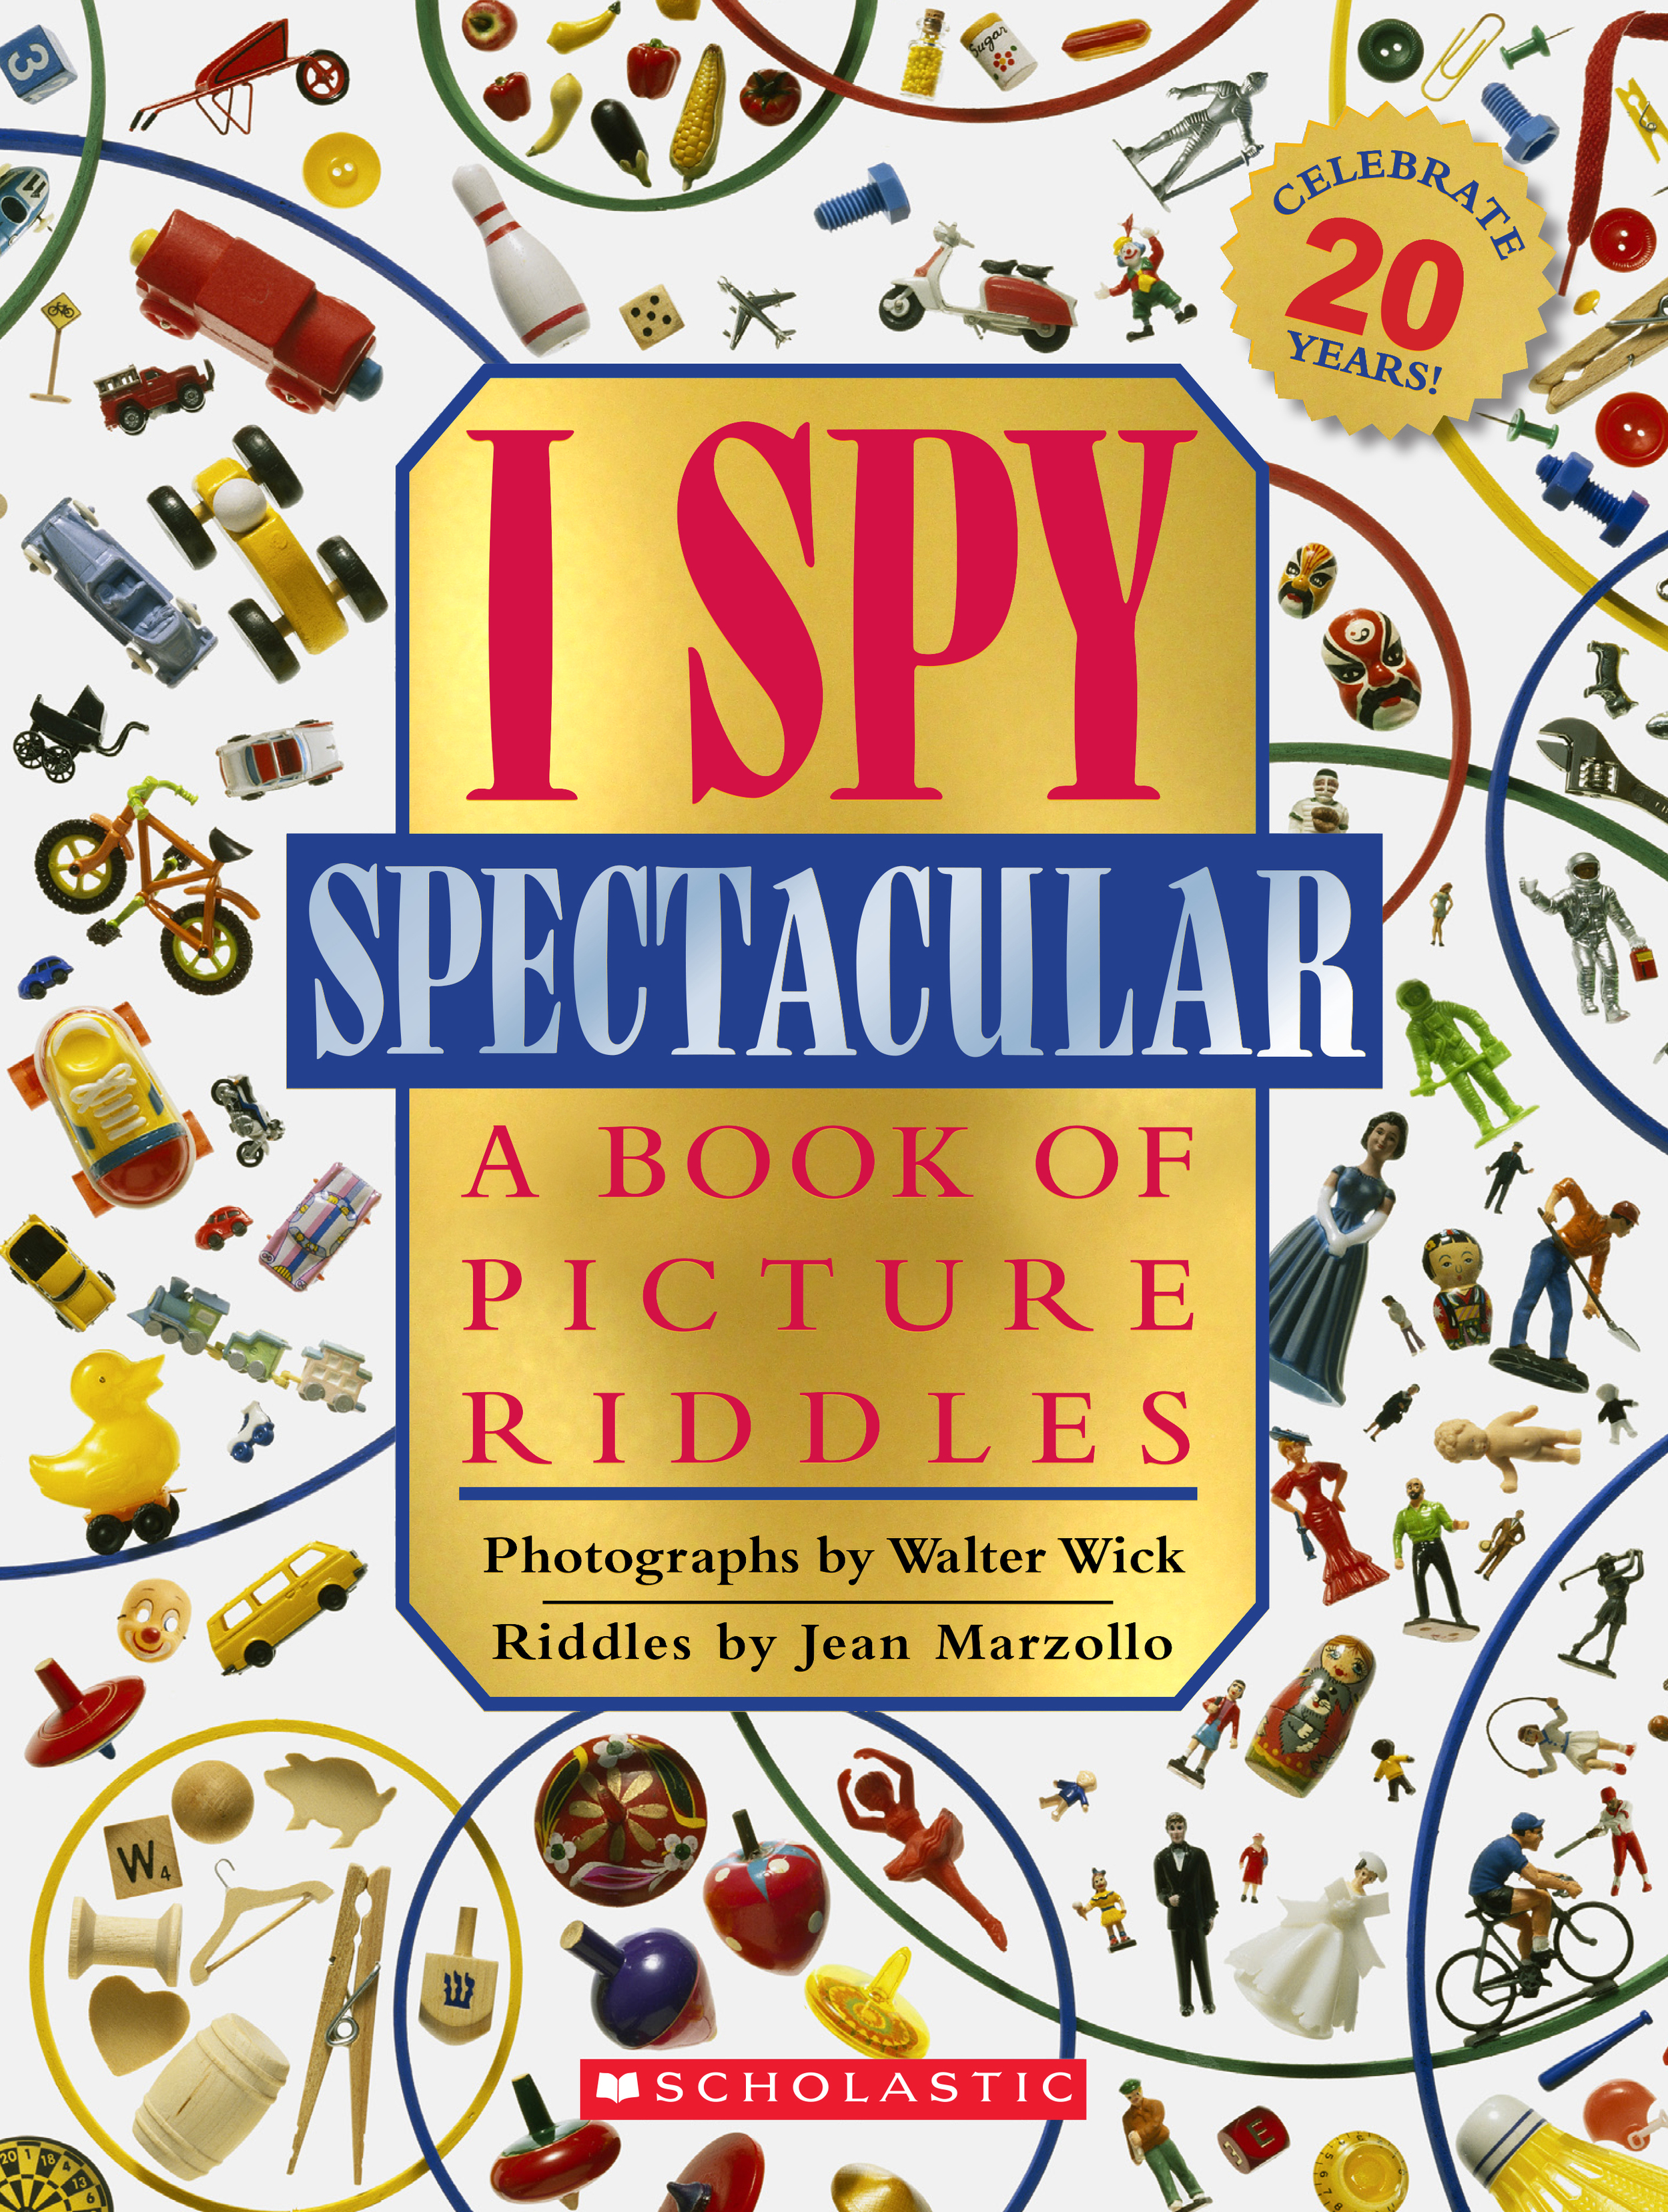 A Book of Picture Riddles I Spy